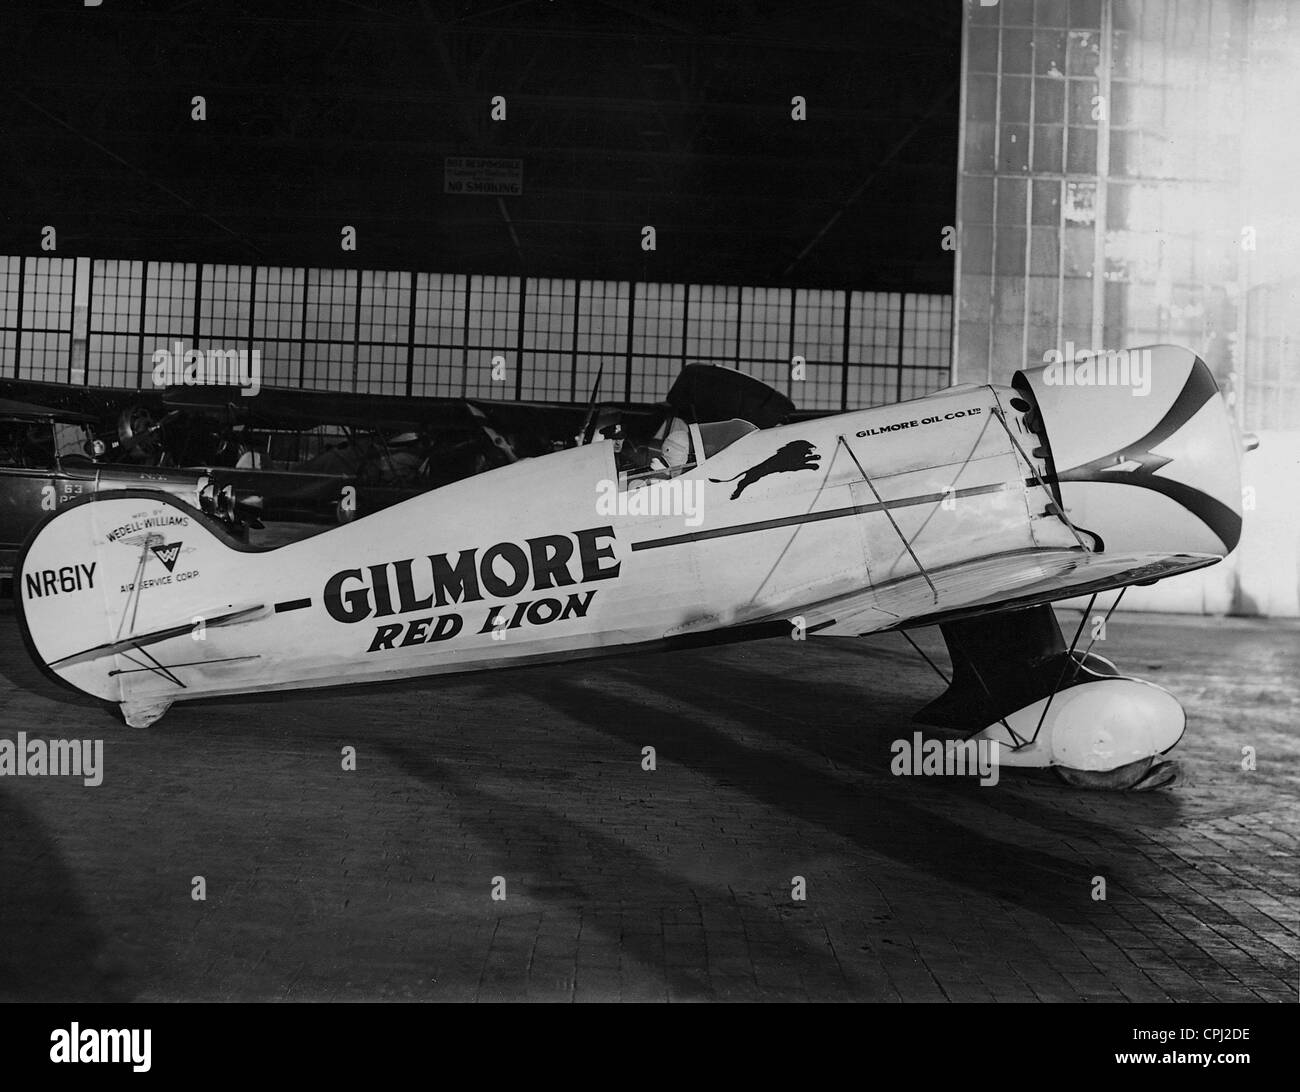 Colonel Roscoe Turner in his plane 'Gilmore Red Lion', 1932 Stock Photo